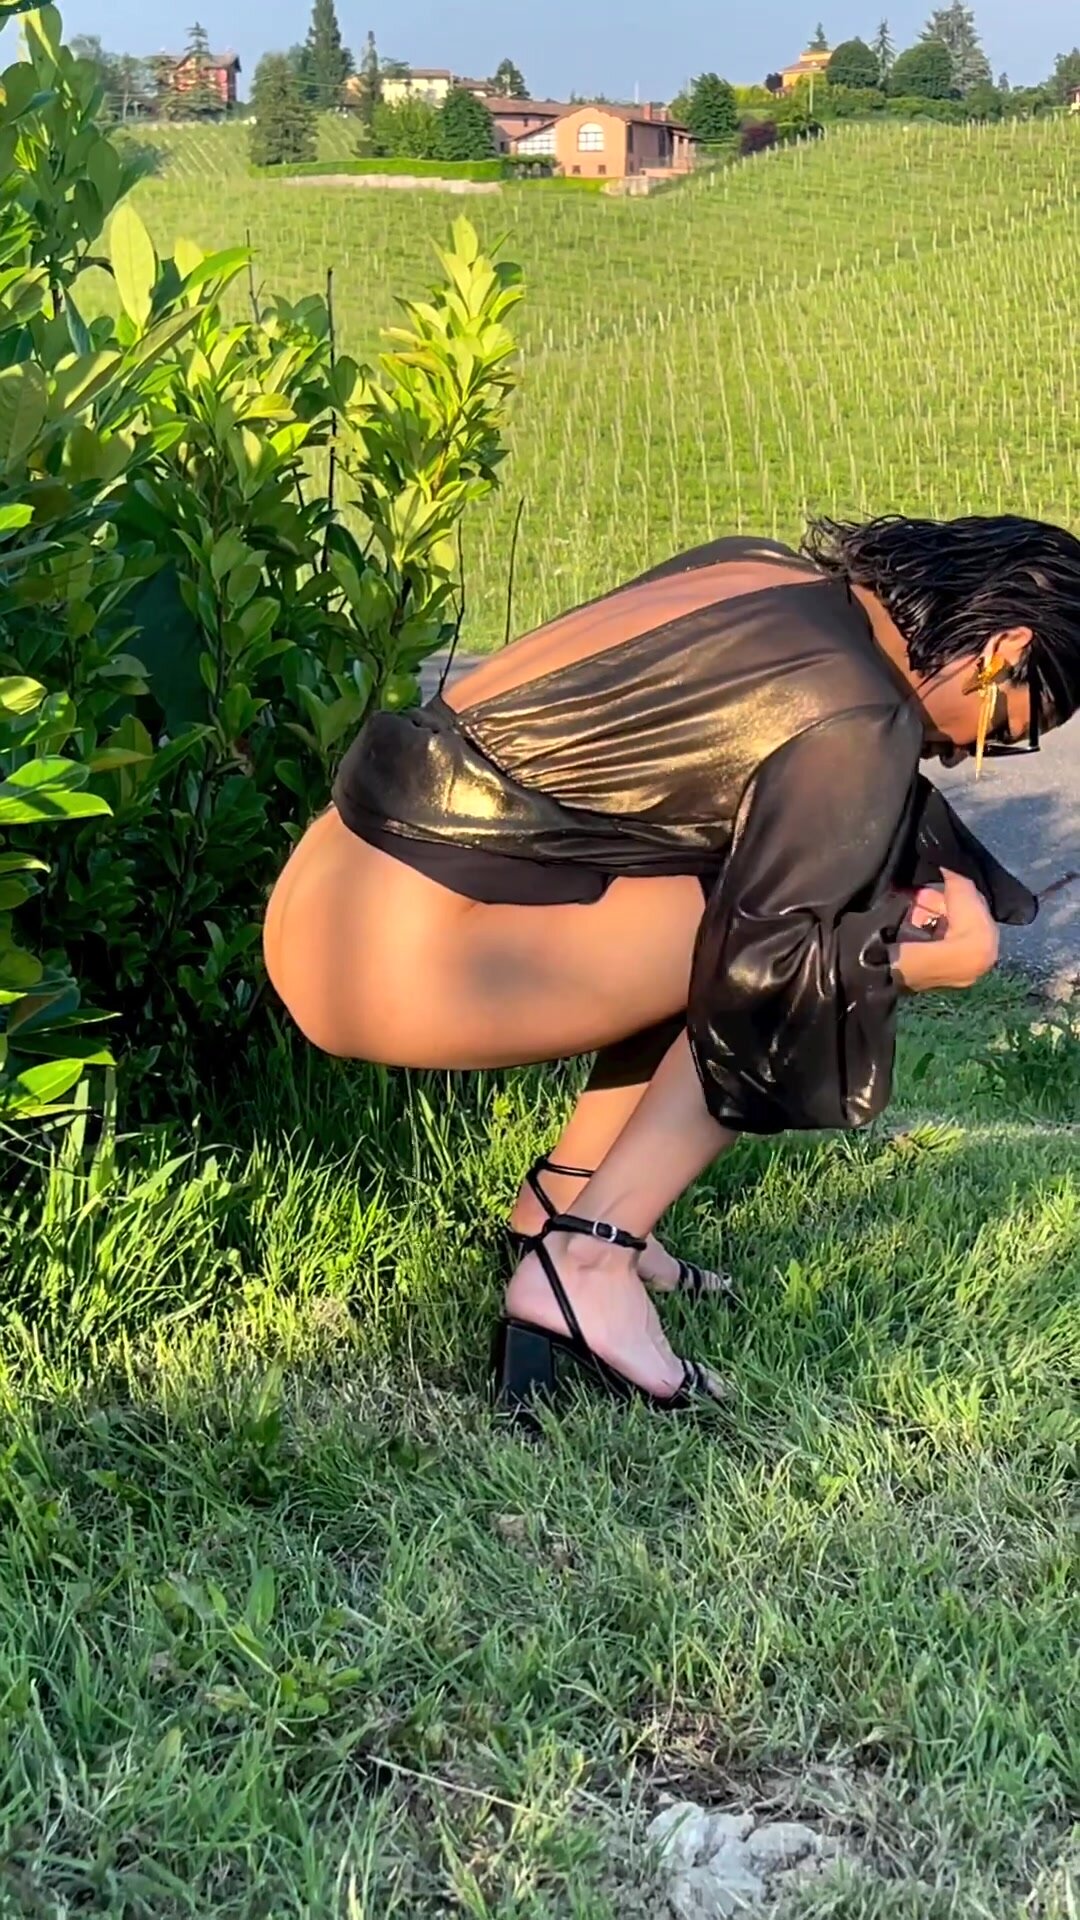 Beauty squats in a vineyard